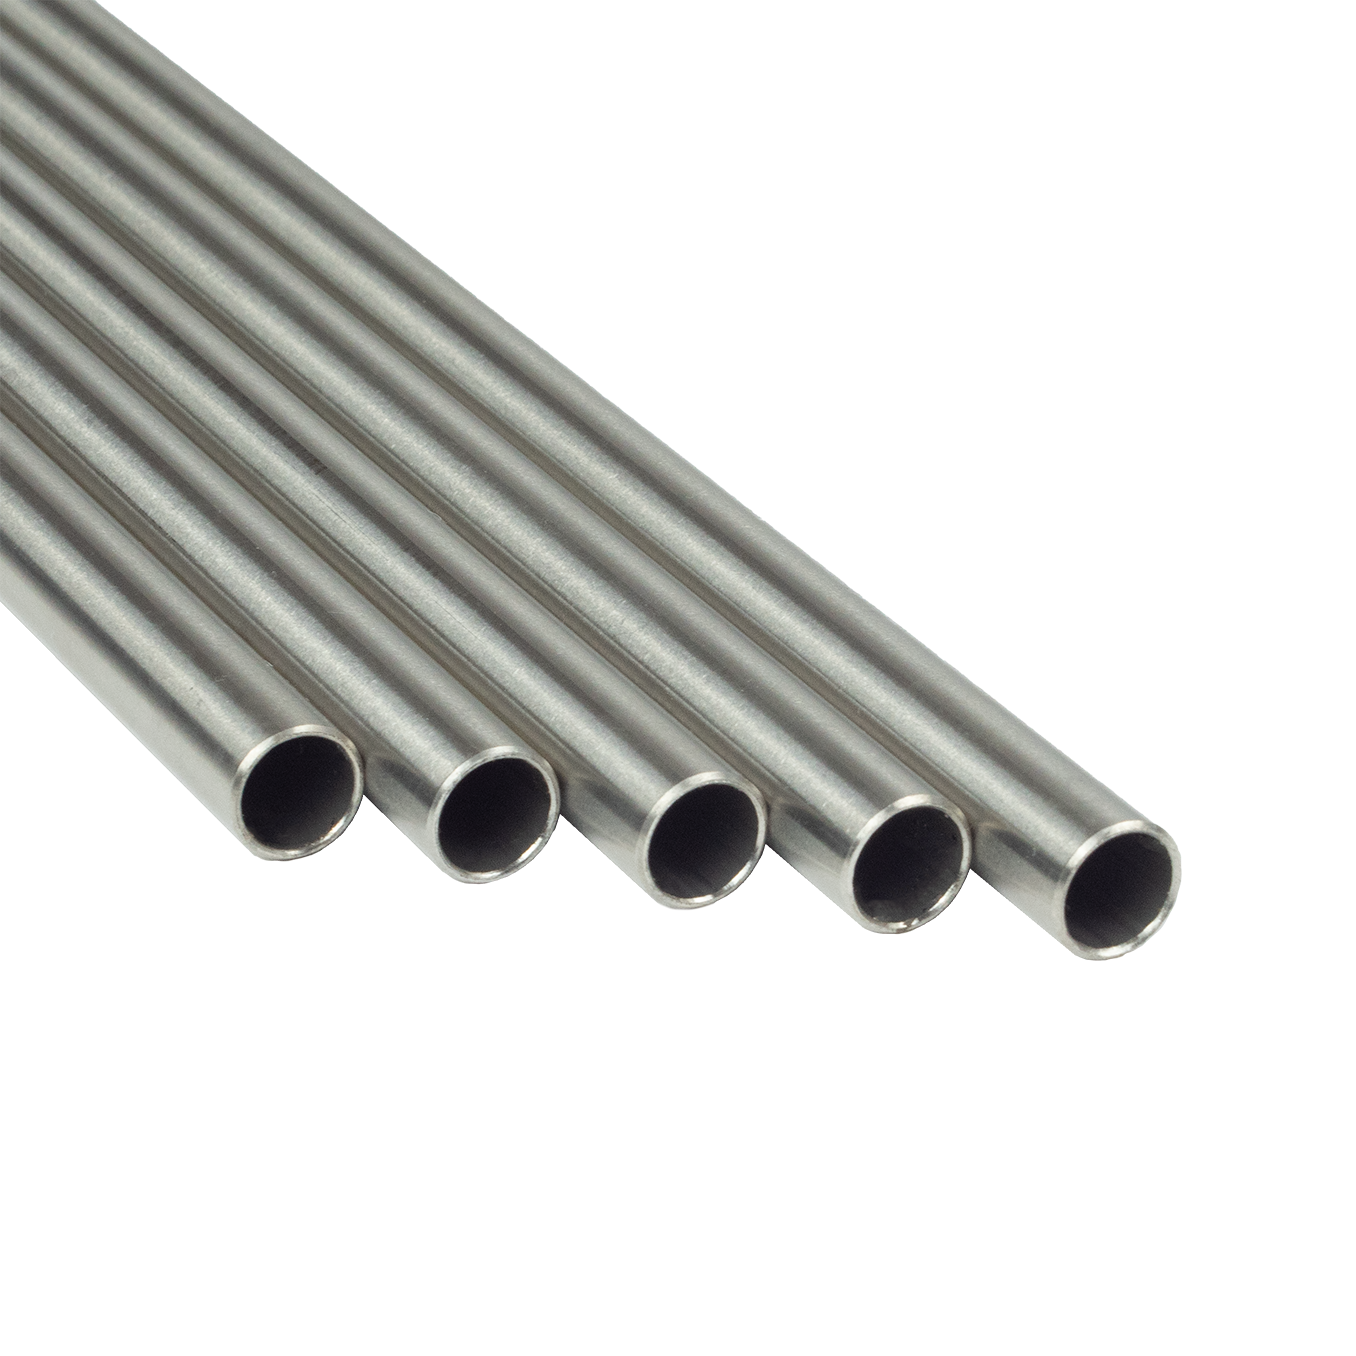 SFS Stand Tube - Ø 13 x 1 mm, length 750 mm - stainless steel